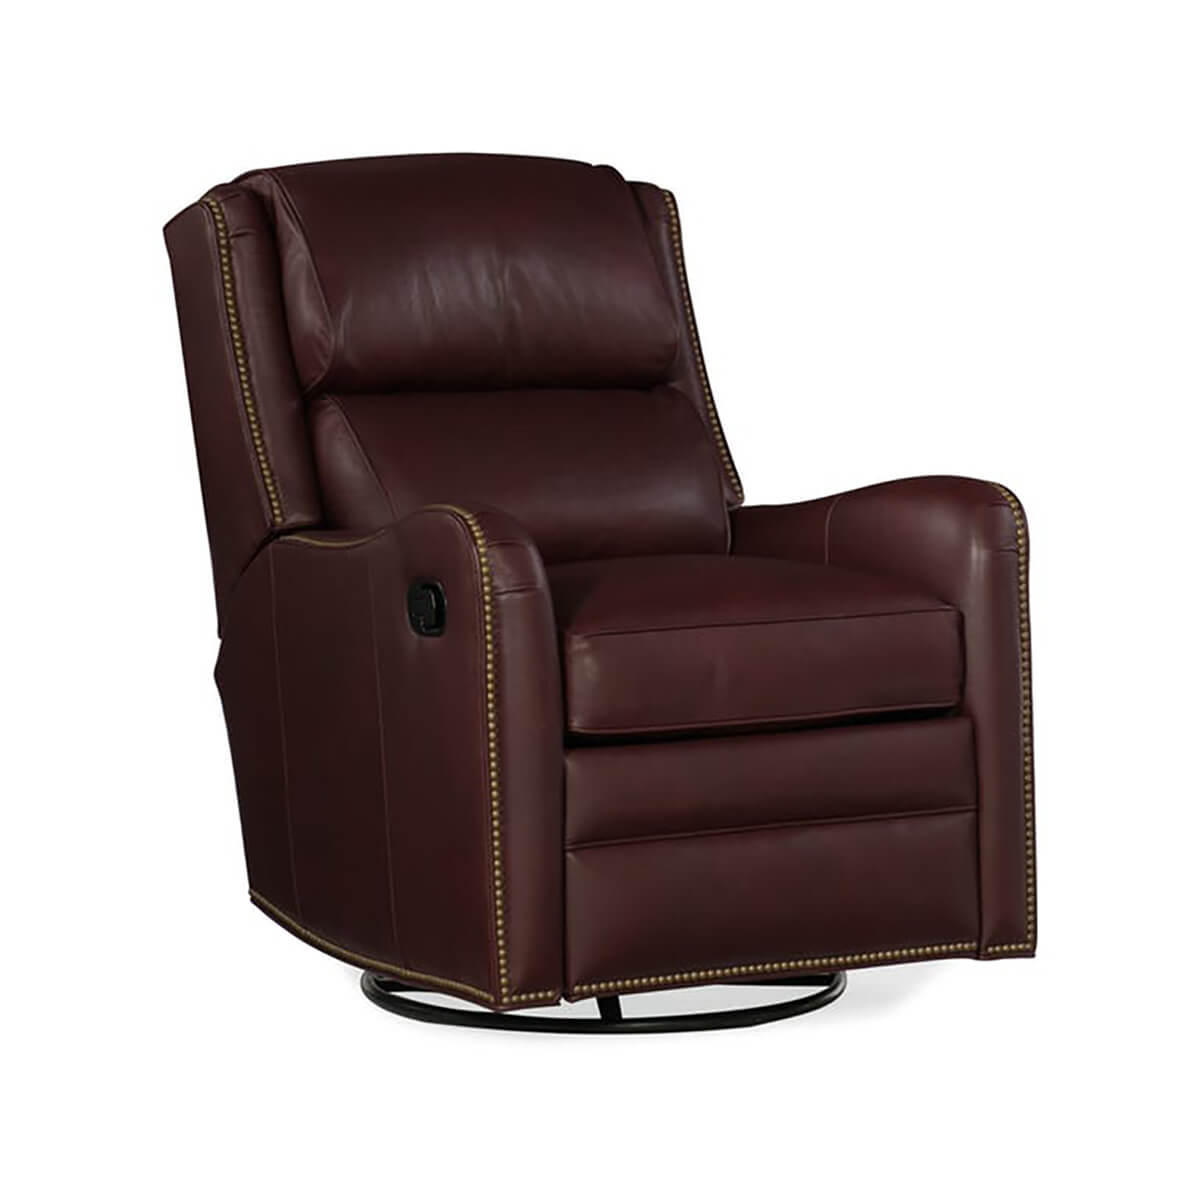 Read more about the article Henley Recliner Swivel Glider Chair